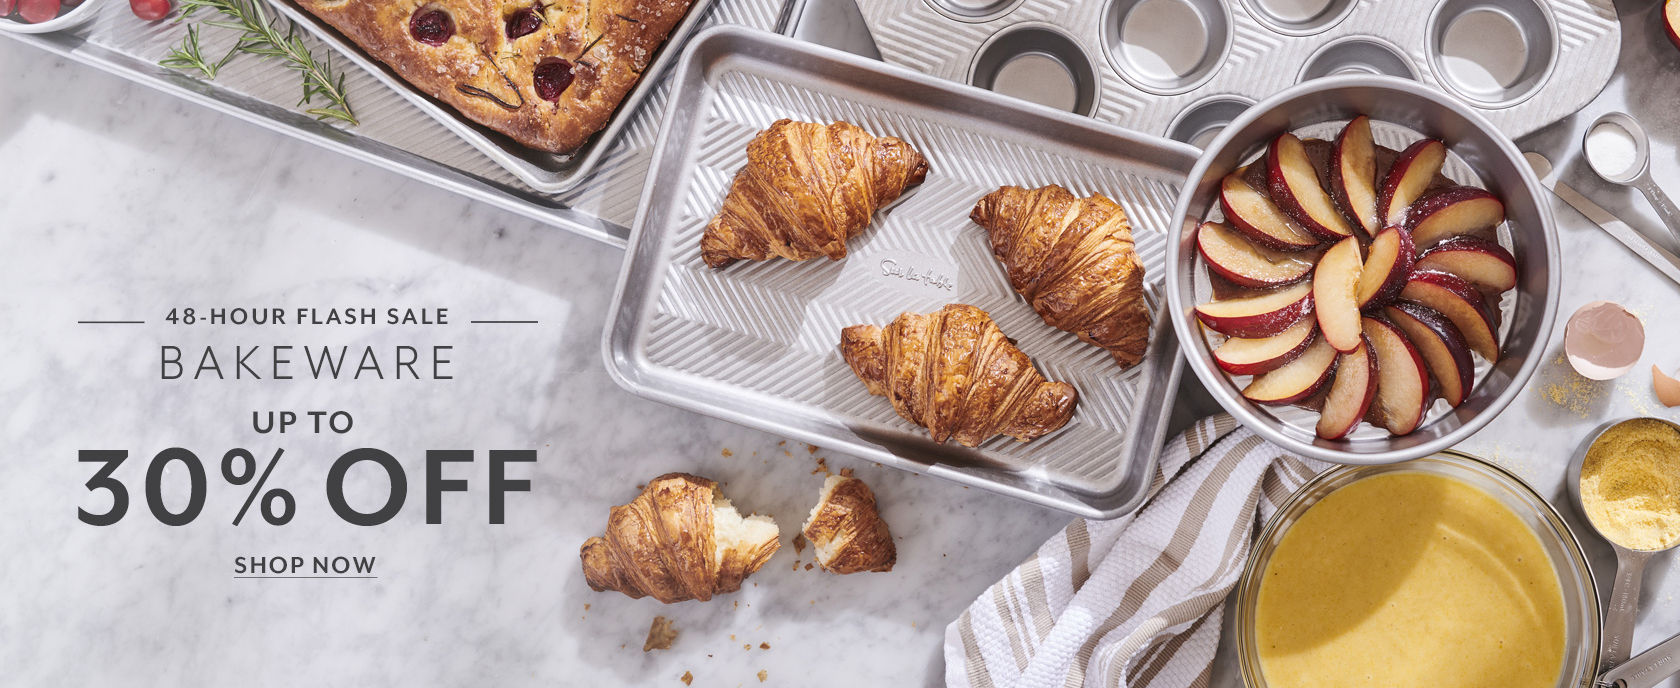 48-hour flash sale bakeware up to 30% off. Shop Now.